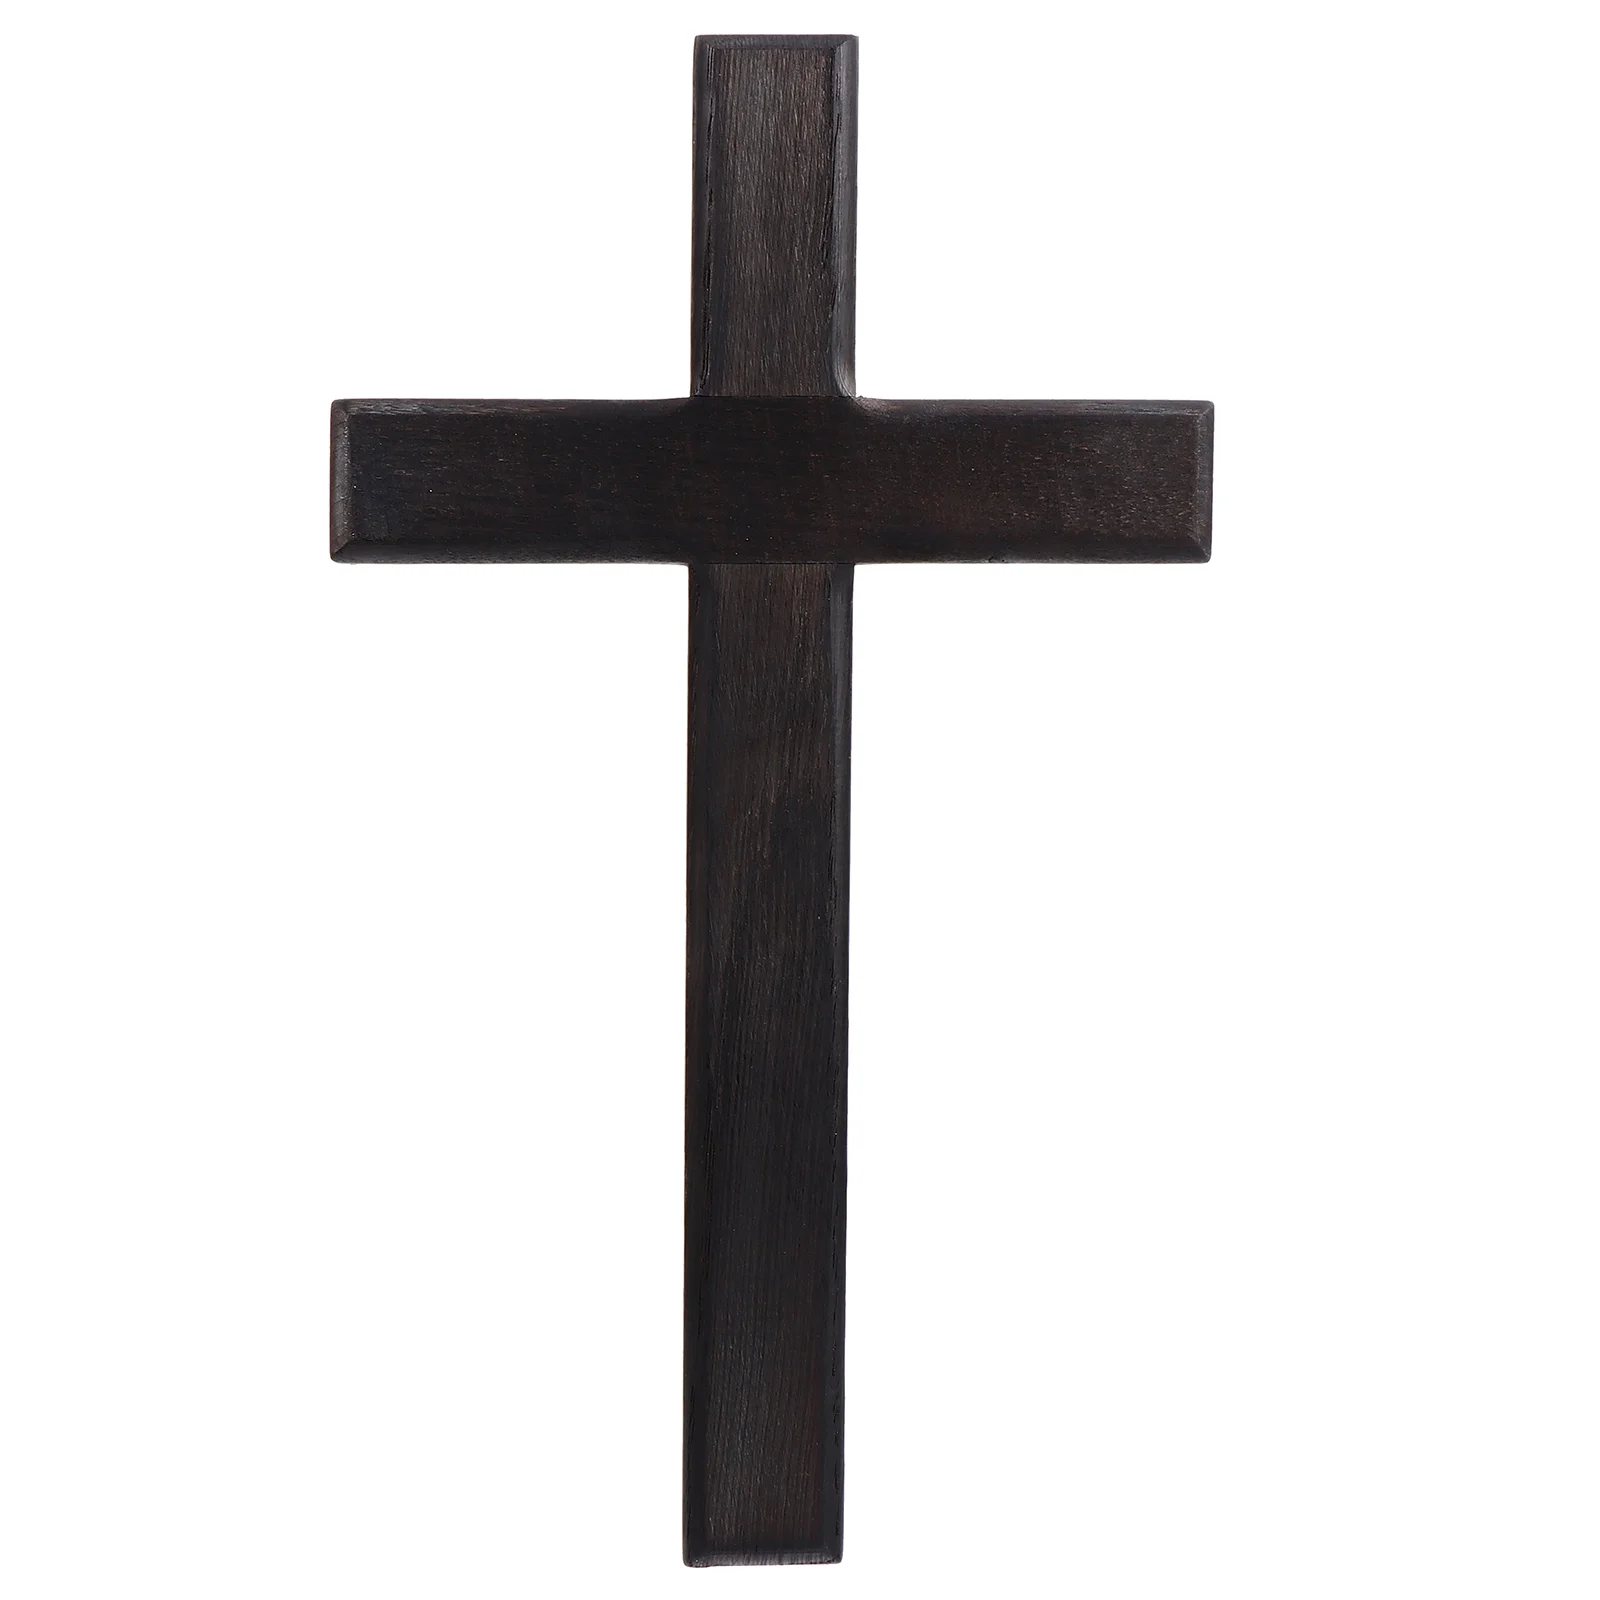 

Cross Wall Wooden Christian Wood Decor Hanging Jesus Pendant Religious Ornament Rustic Catholic Decorative Mounted Craft Carved